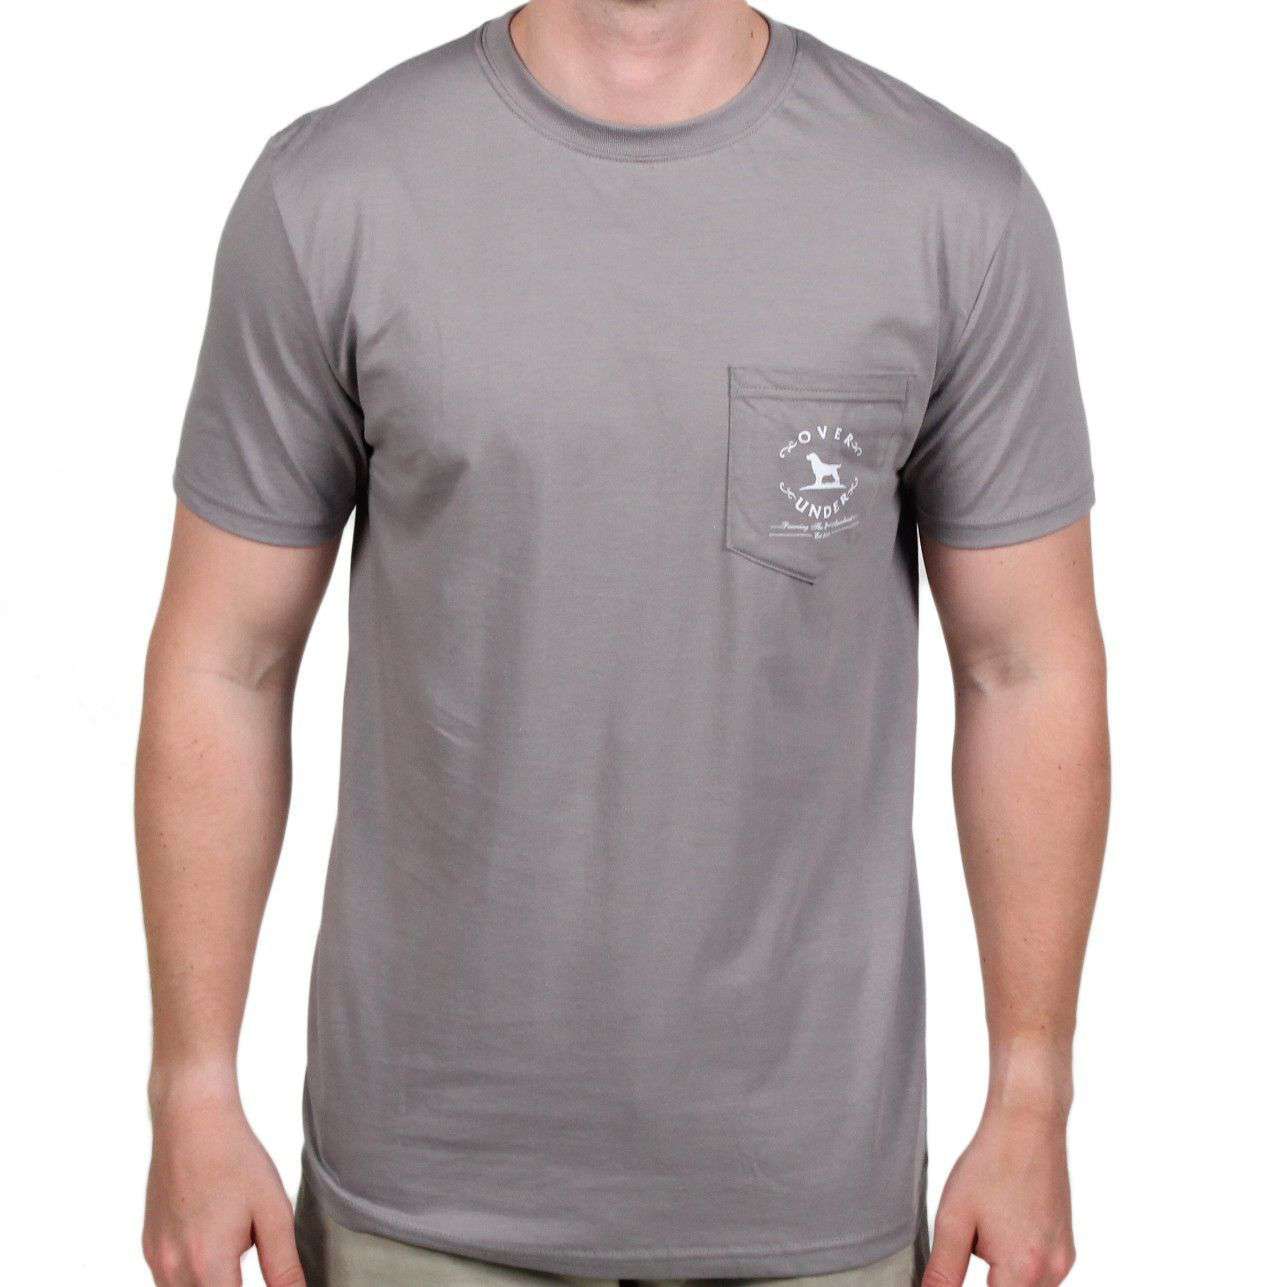 Come and Take It Alabama Tee in Grey by Over Under Clothing - Country Club Prep